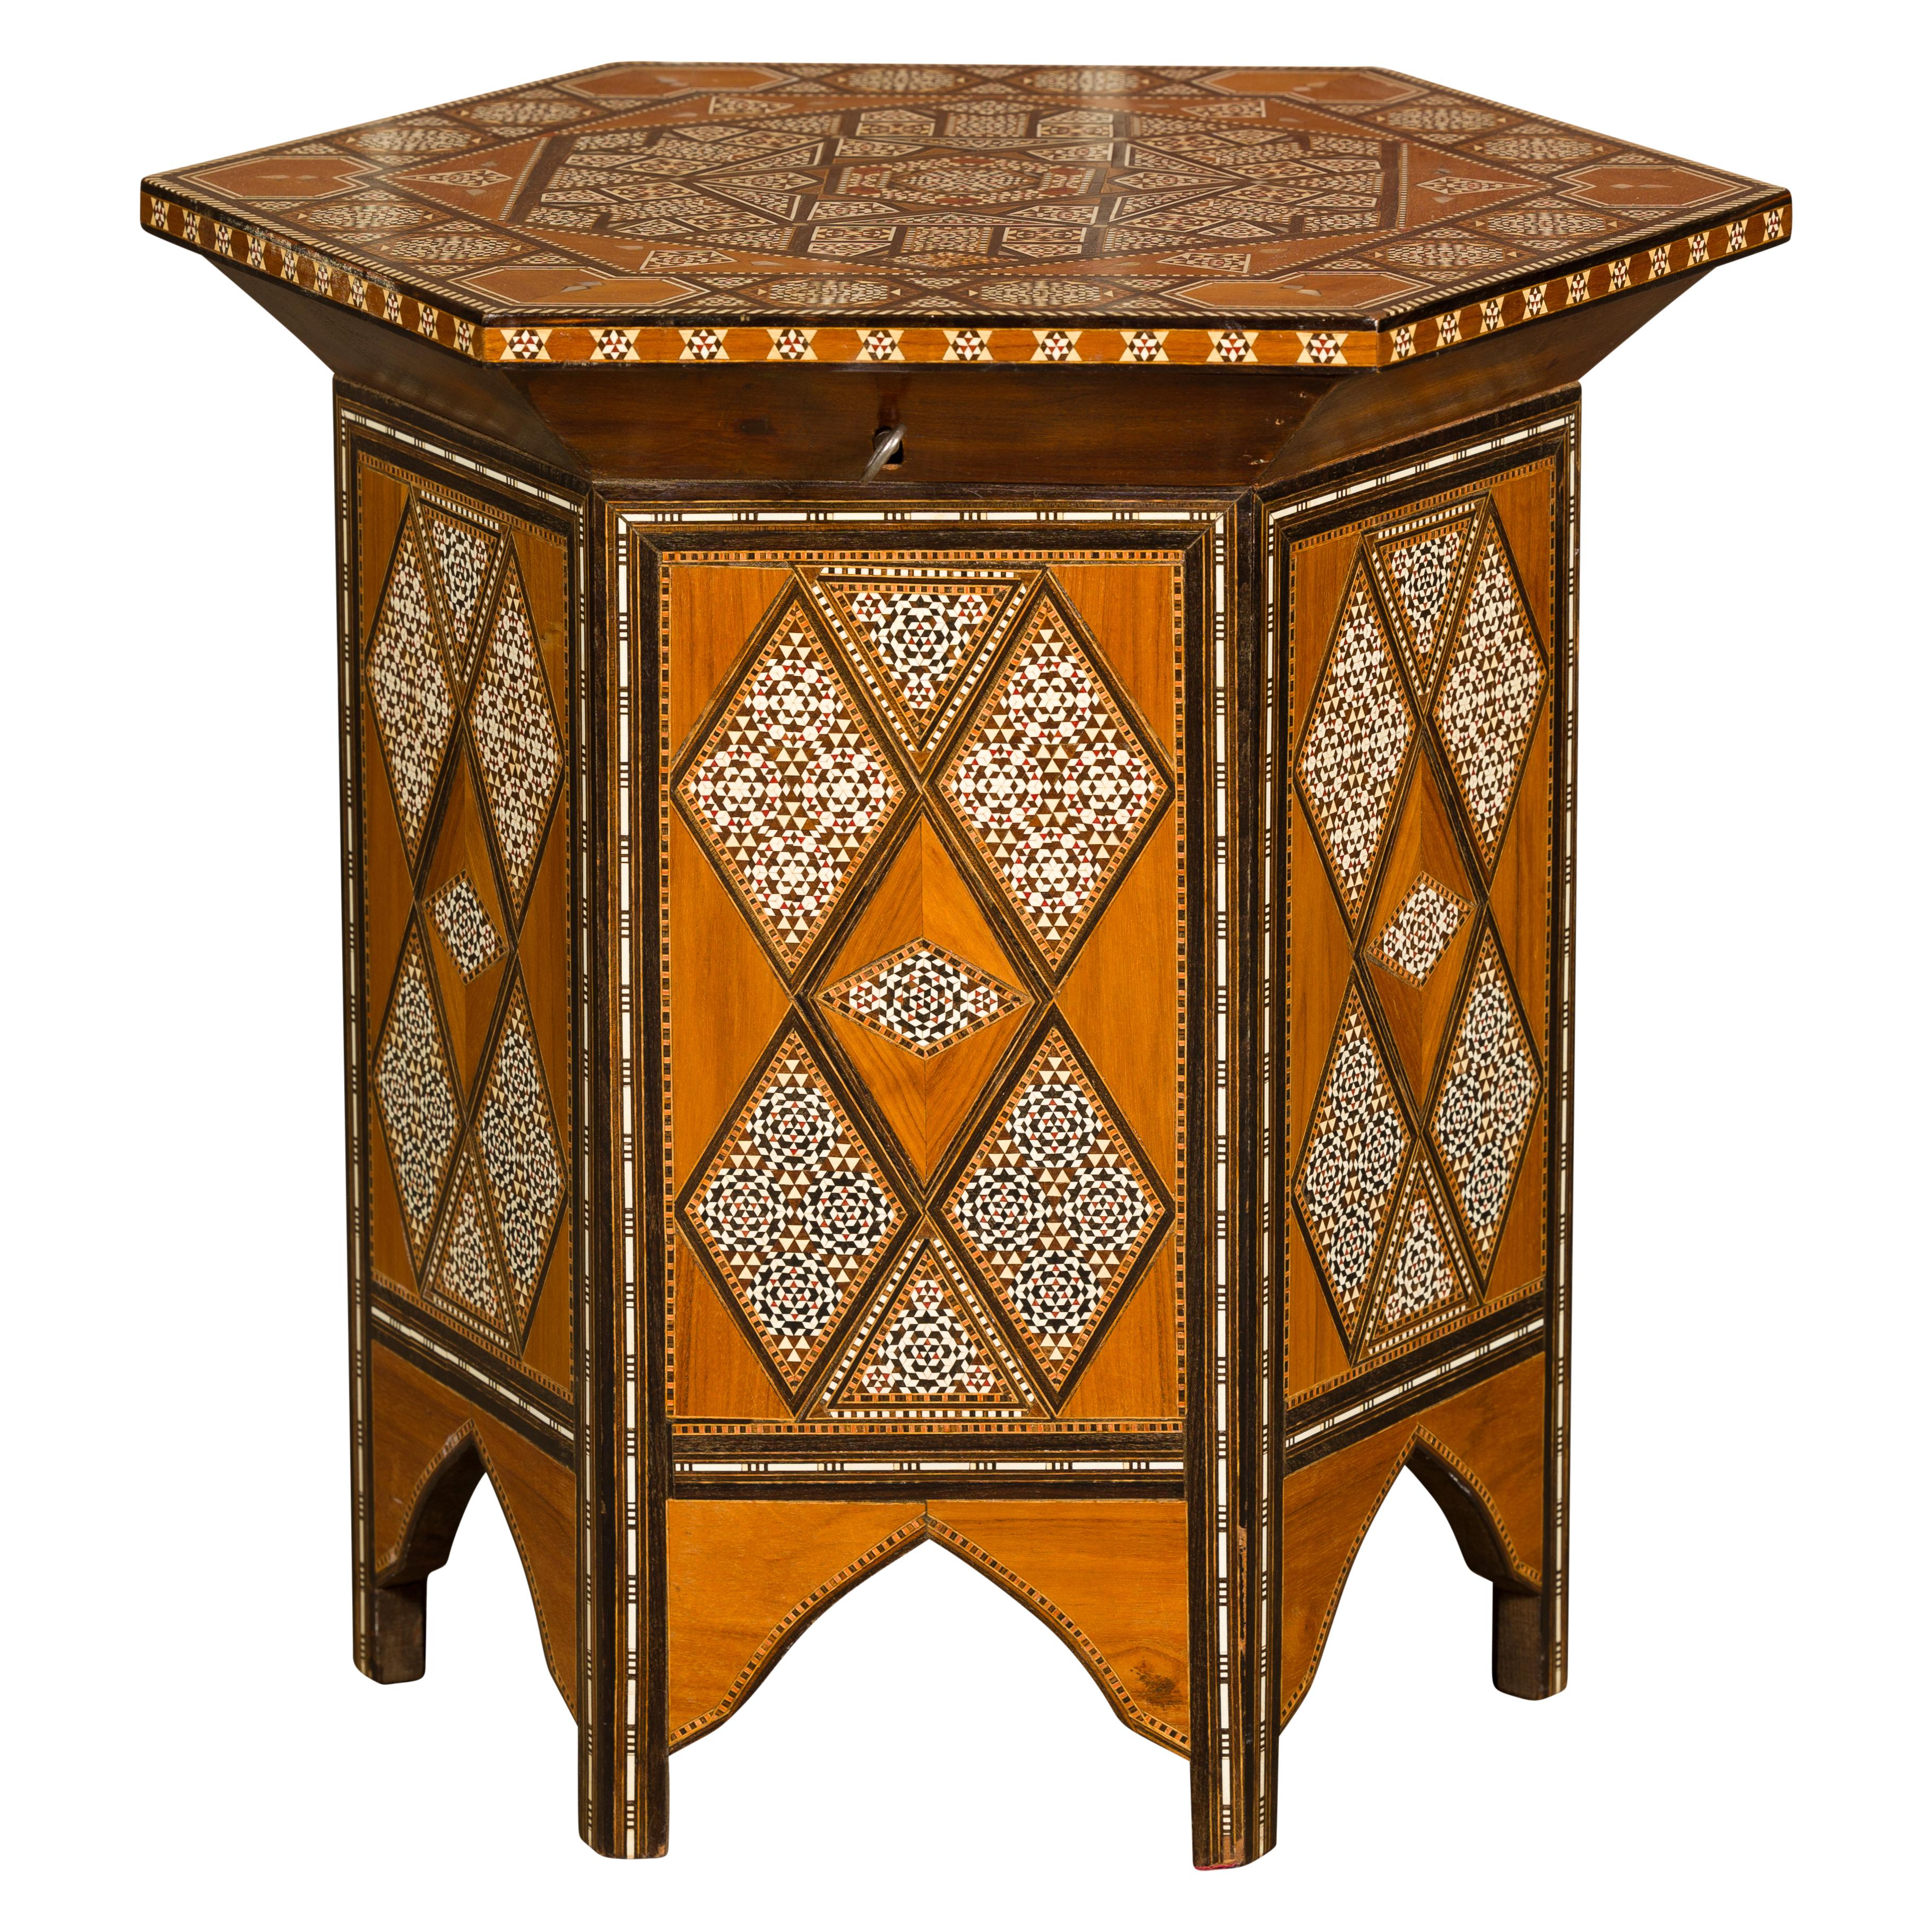 A Moorish Style 1920s Moroccan Drinks Table with Bone Inlay and Lift Top For Sale 12